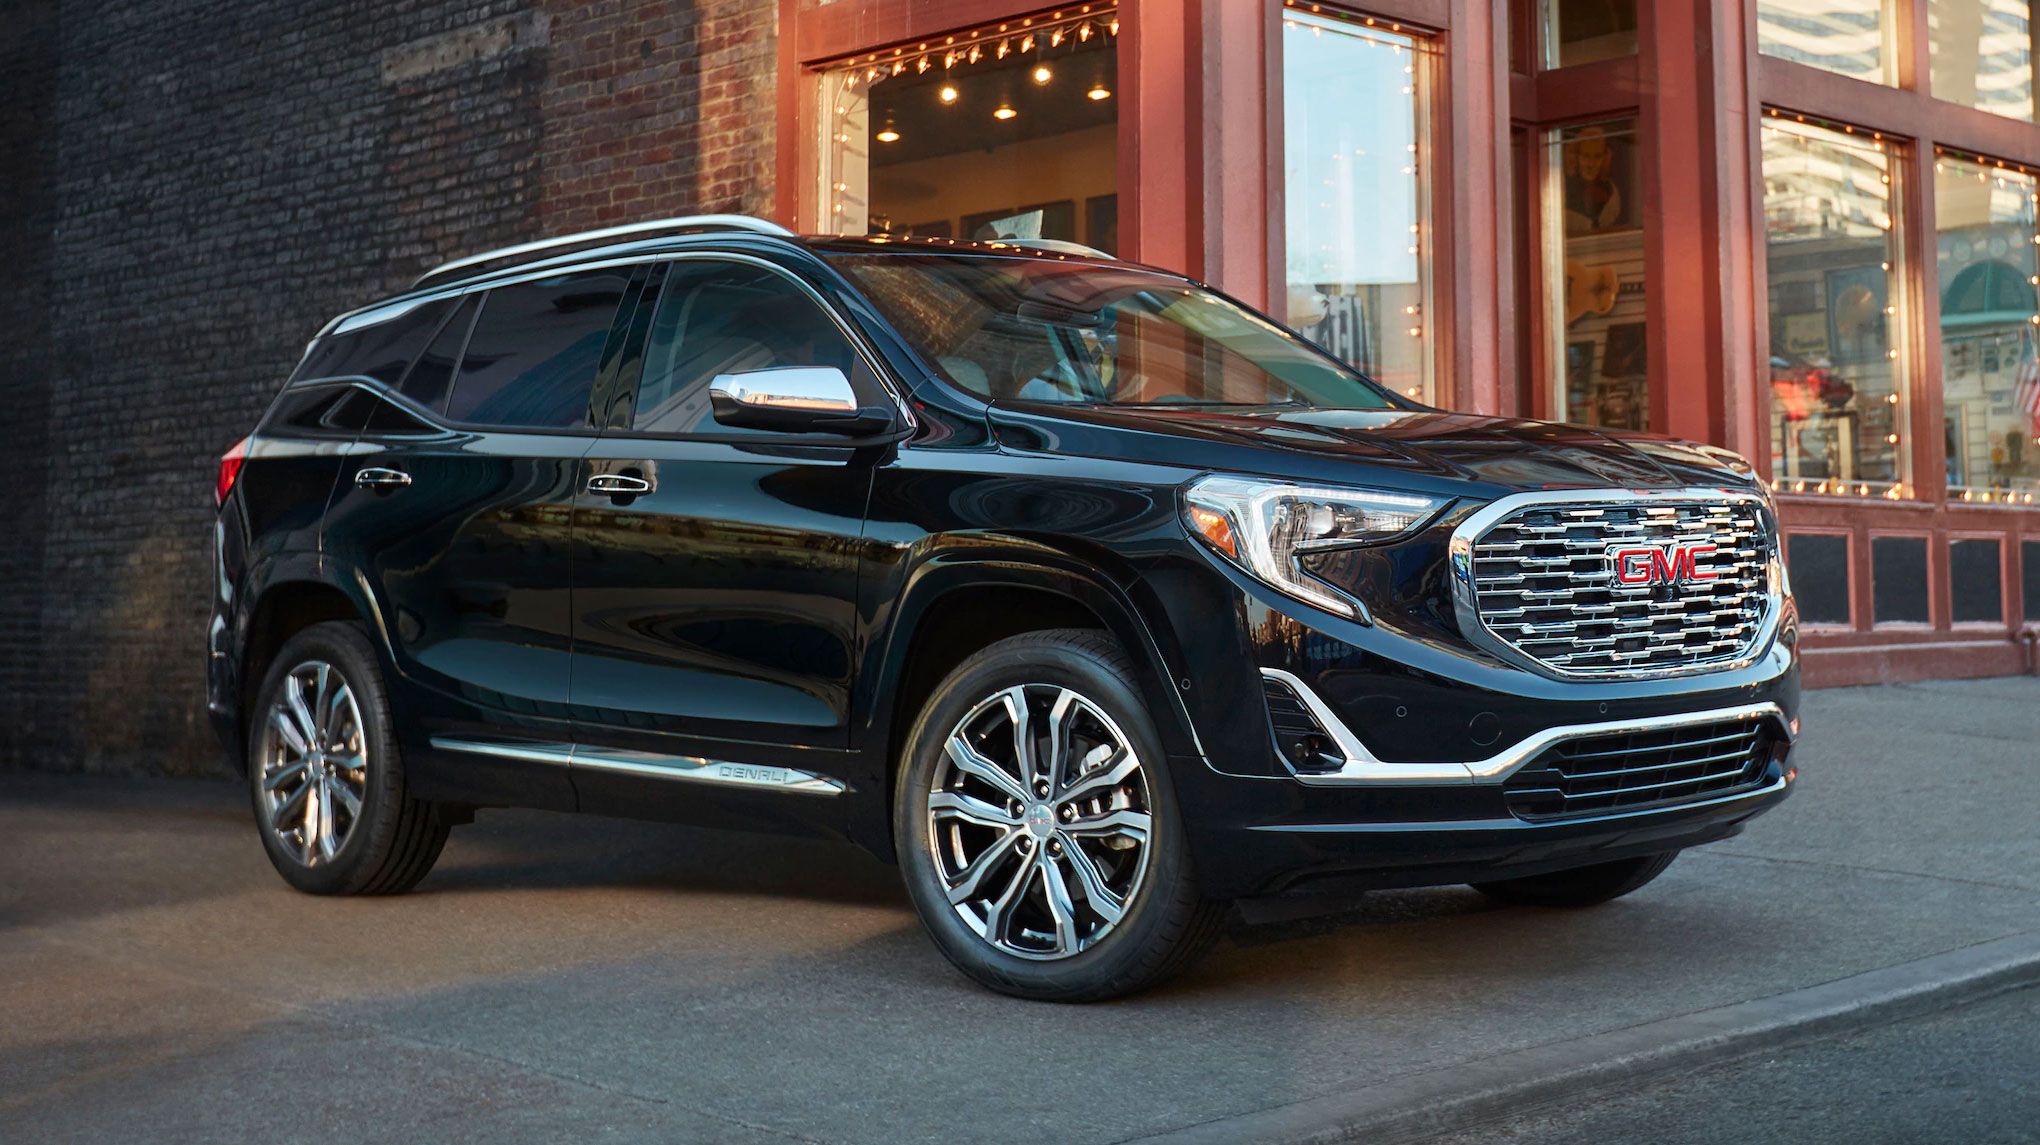 5 GMC Terrain Review, Pricing, and Specs